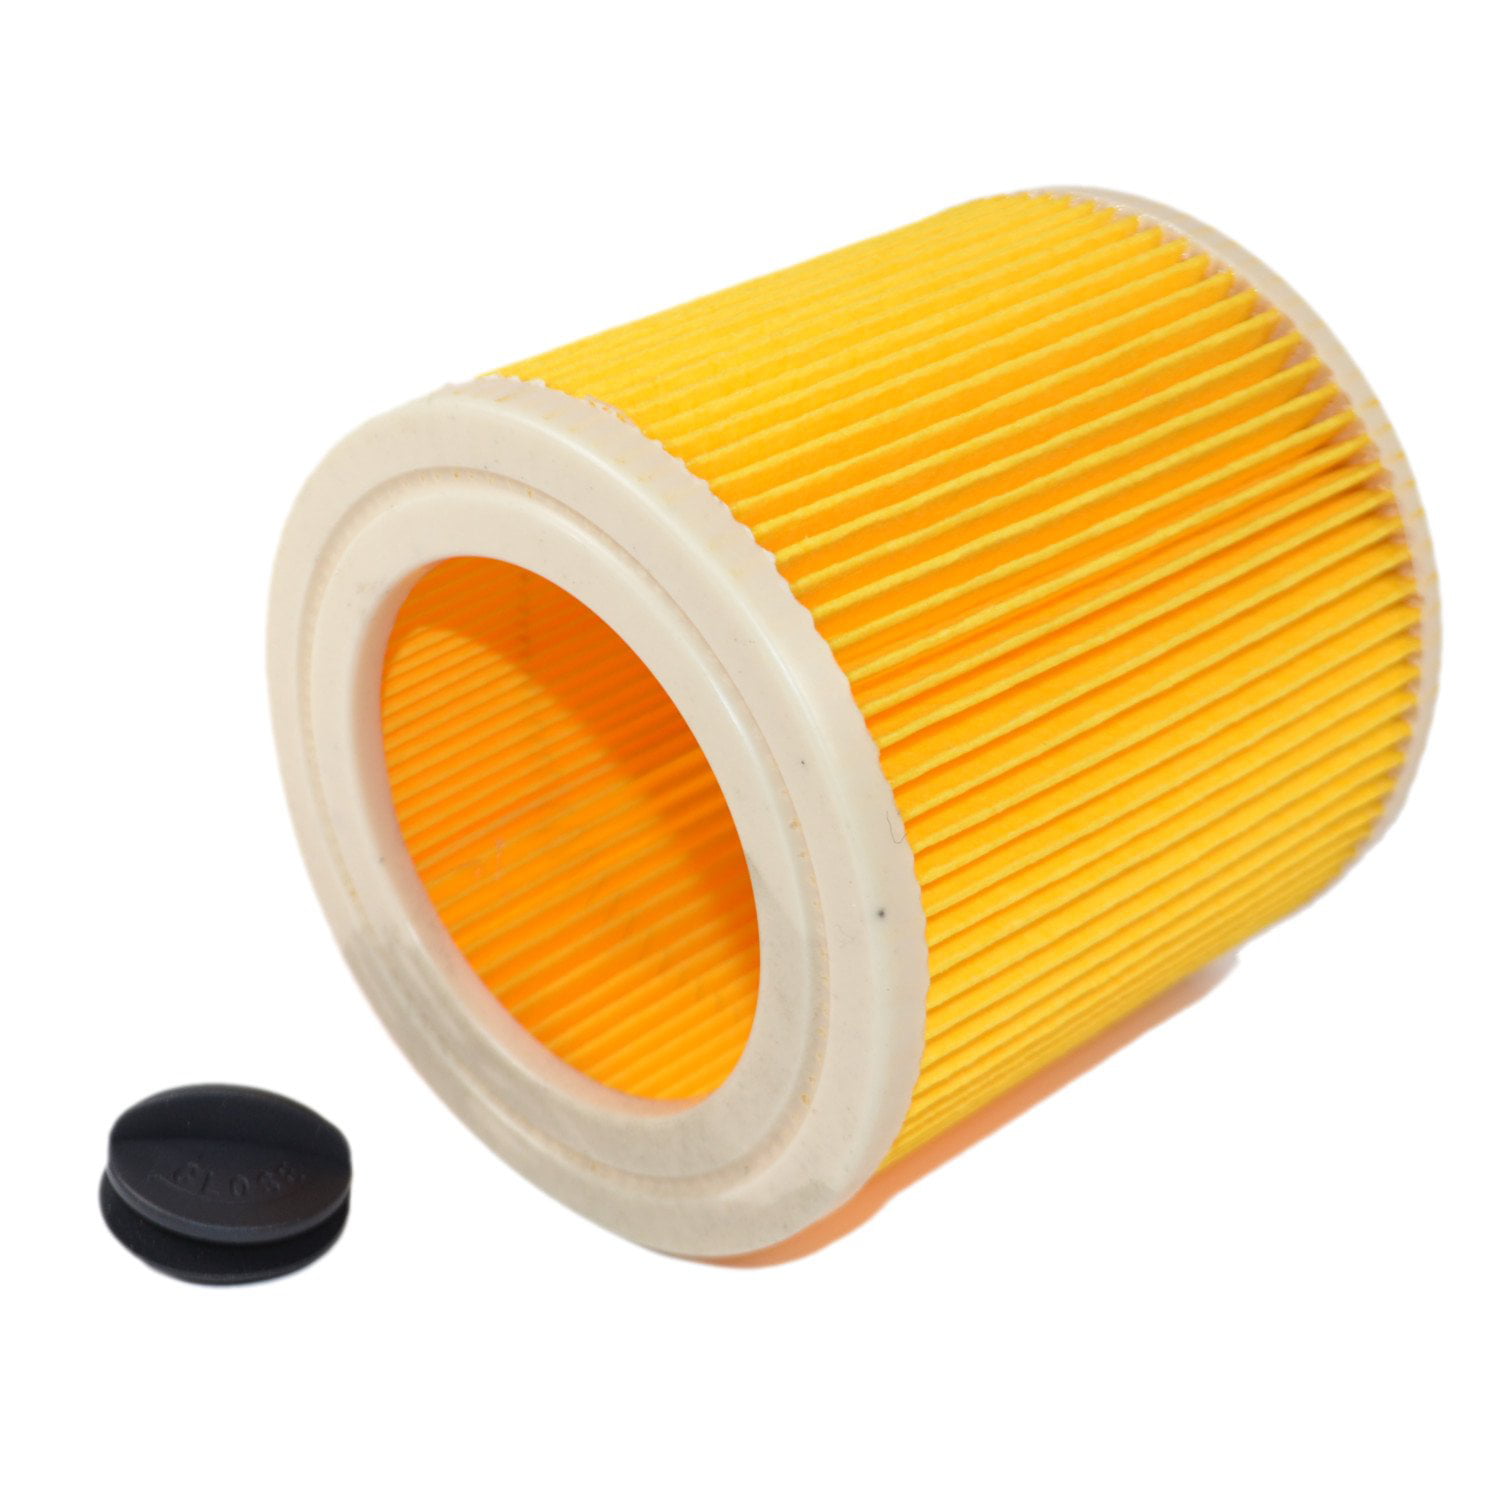 HQRP Cartridge Filter for Karcher WD WD2 WD3 Series Wet /& Dry Vac Vacuum Cleaner